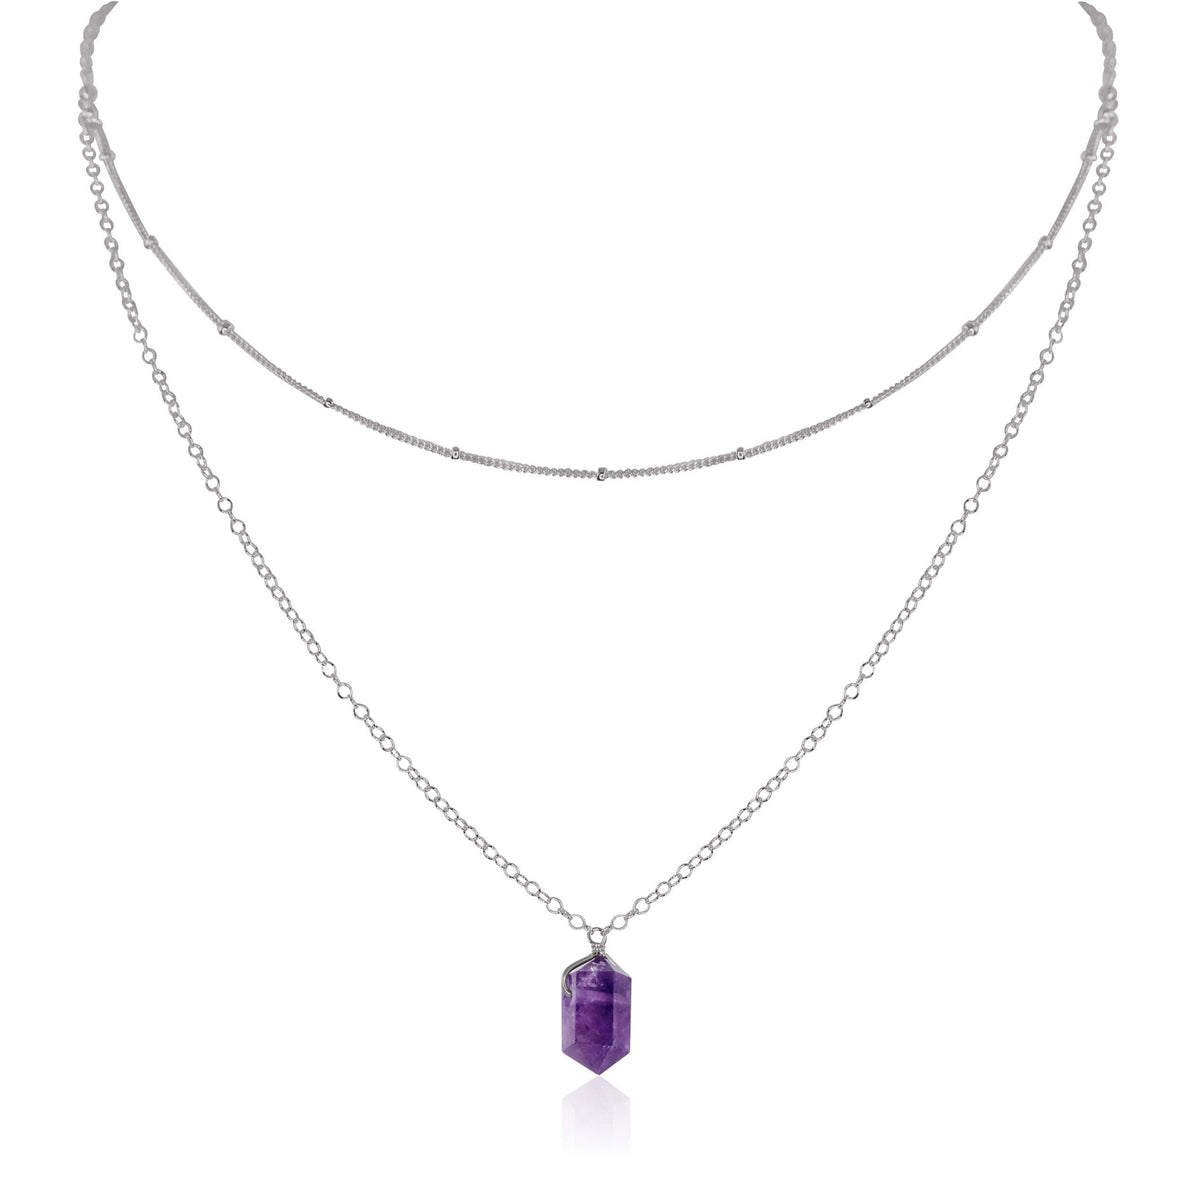 Double Terminated Crystal Layered Choker - Amethyst - Stainless Steel - Luna Tide Handmade Jewellery